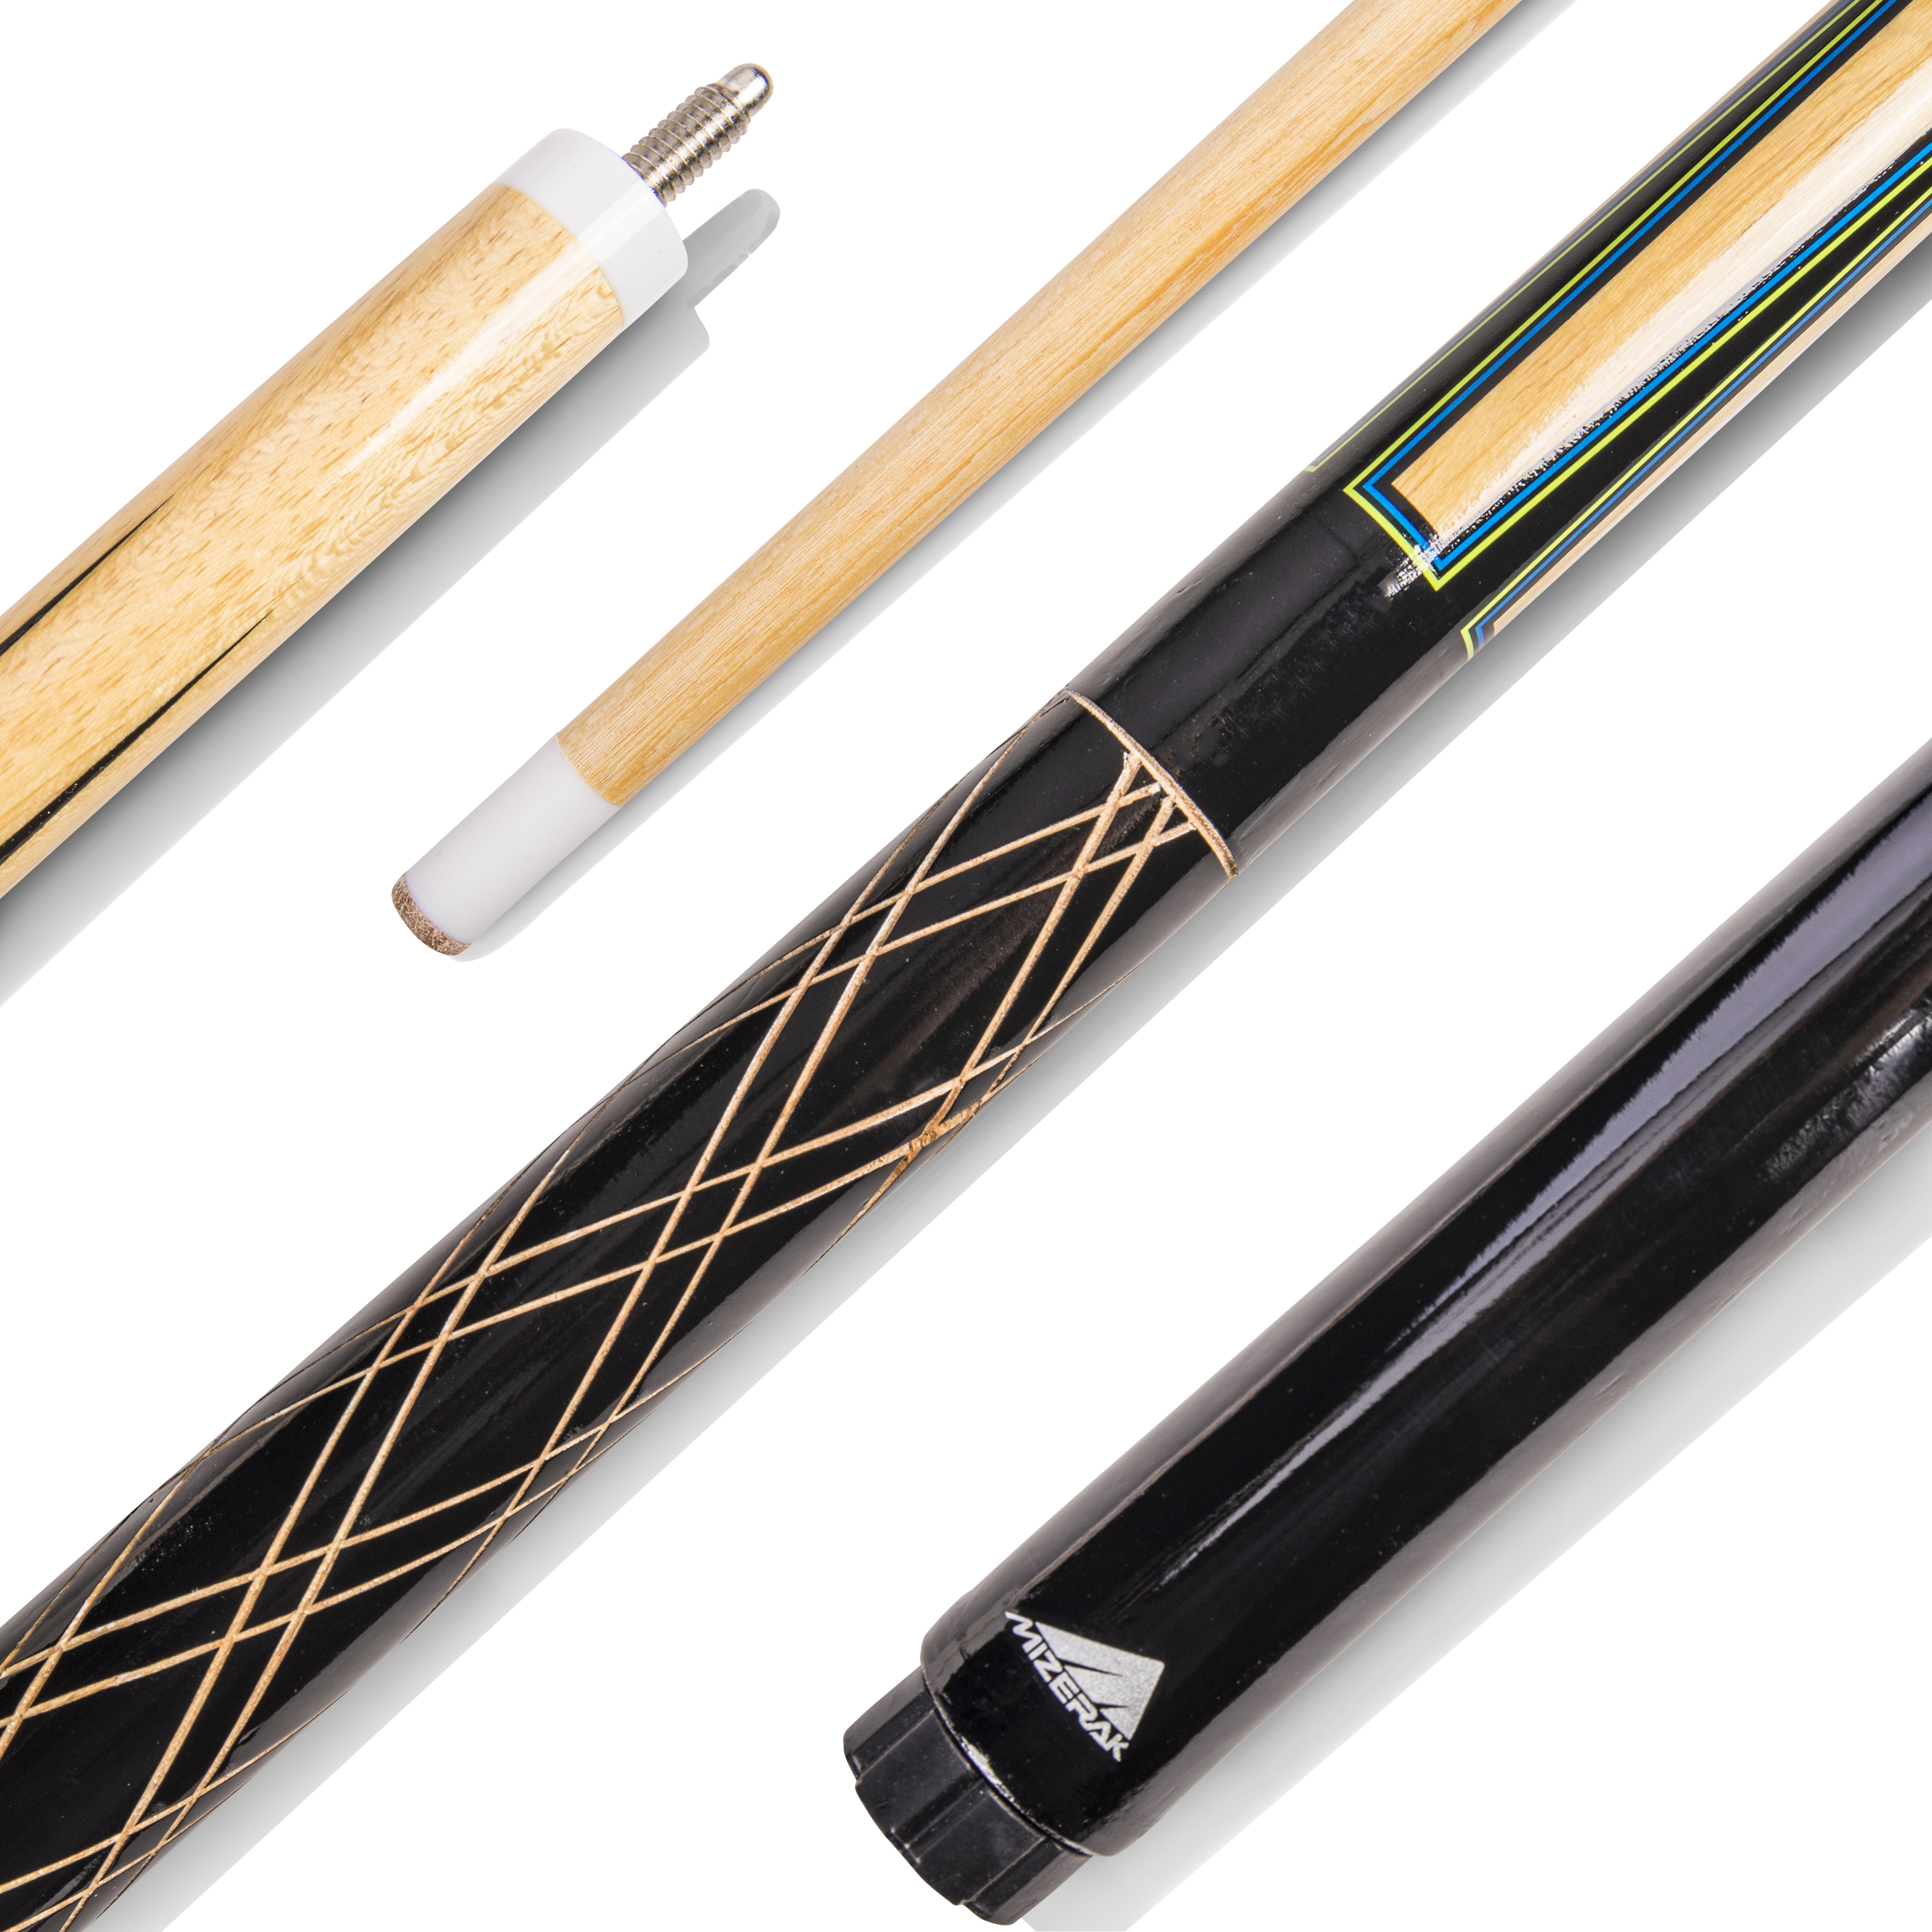 Mizerak 57" House Cue (2-Piece) with 12mm Ferrule with Leather Tip, Hardwood Construction and High Gloss Finish